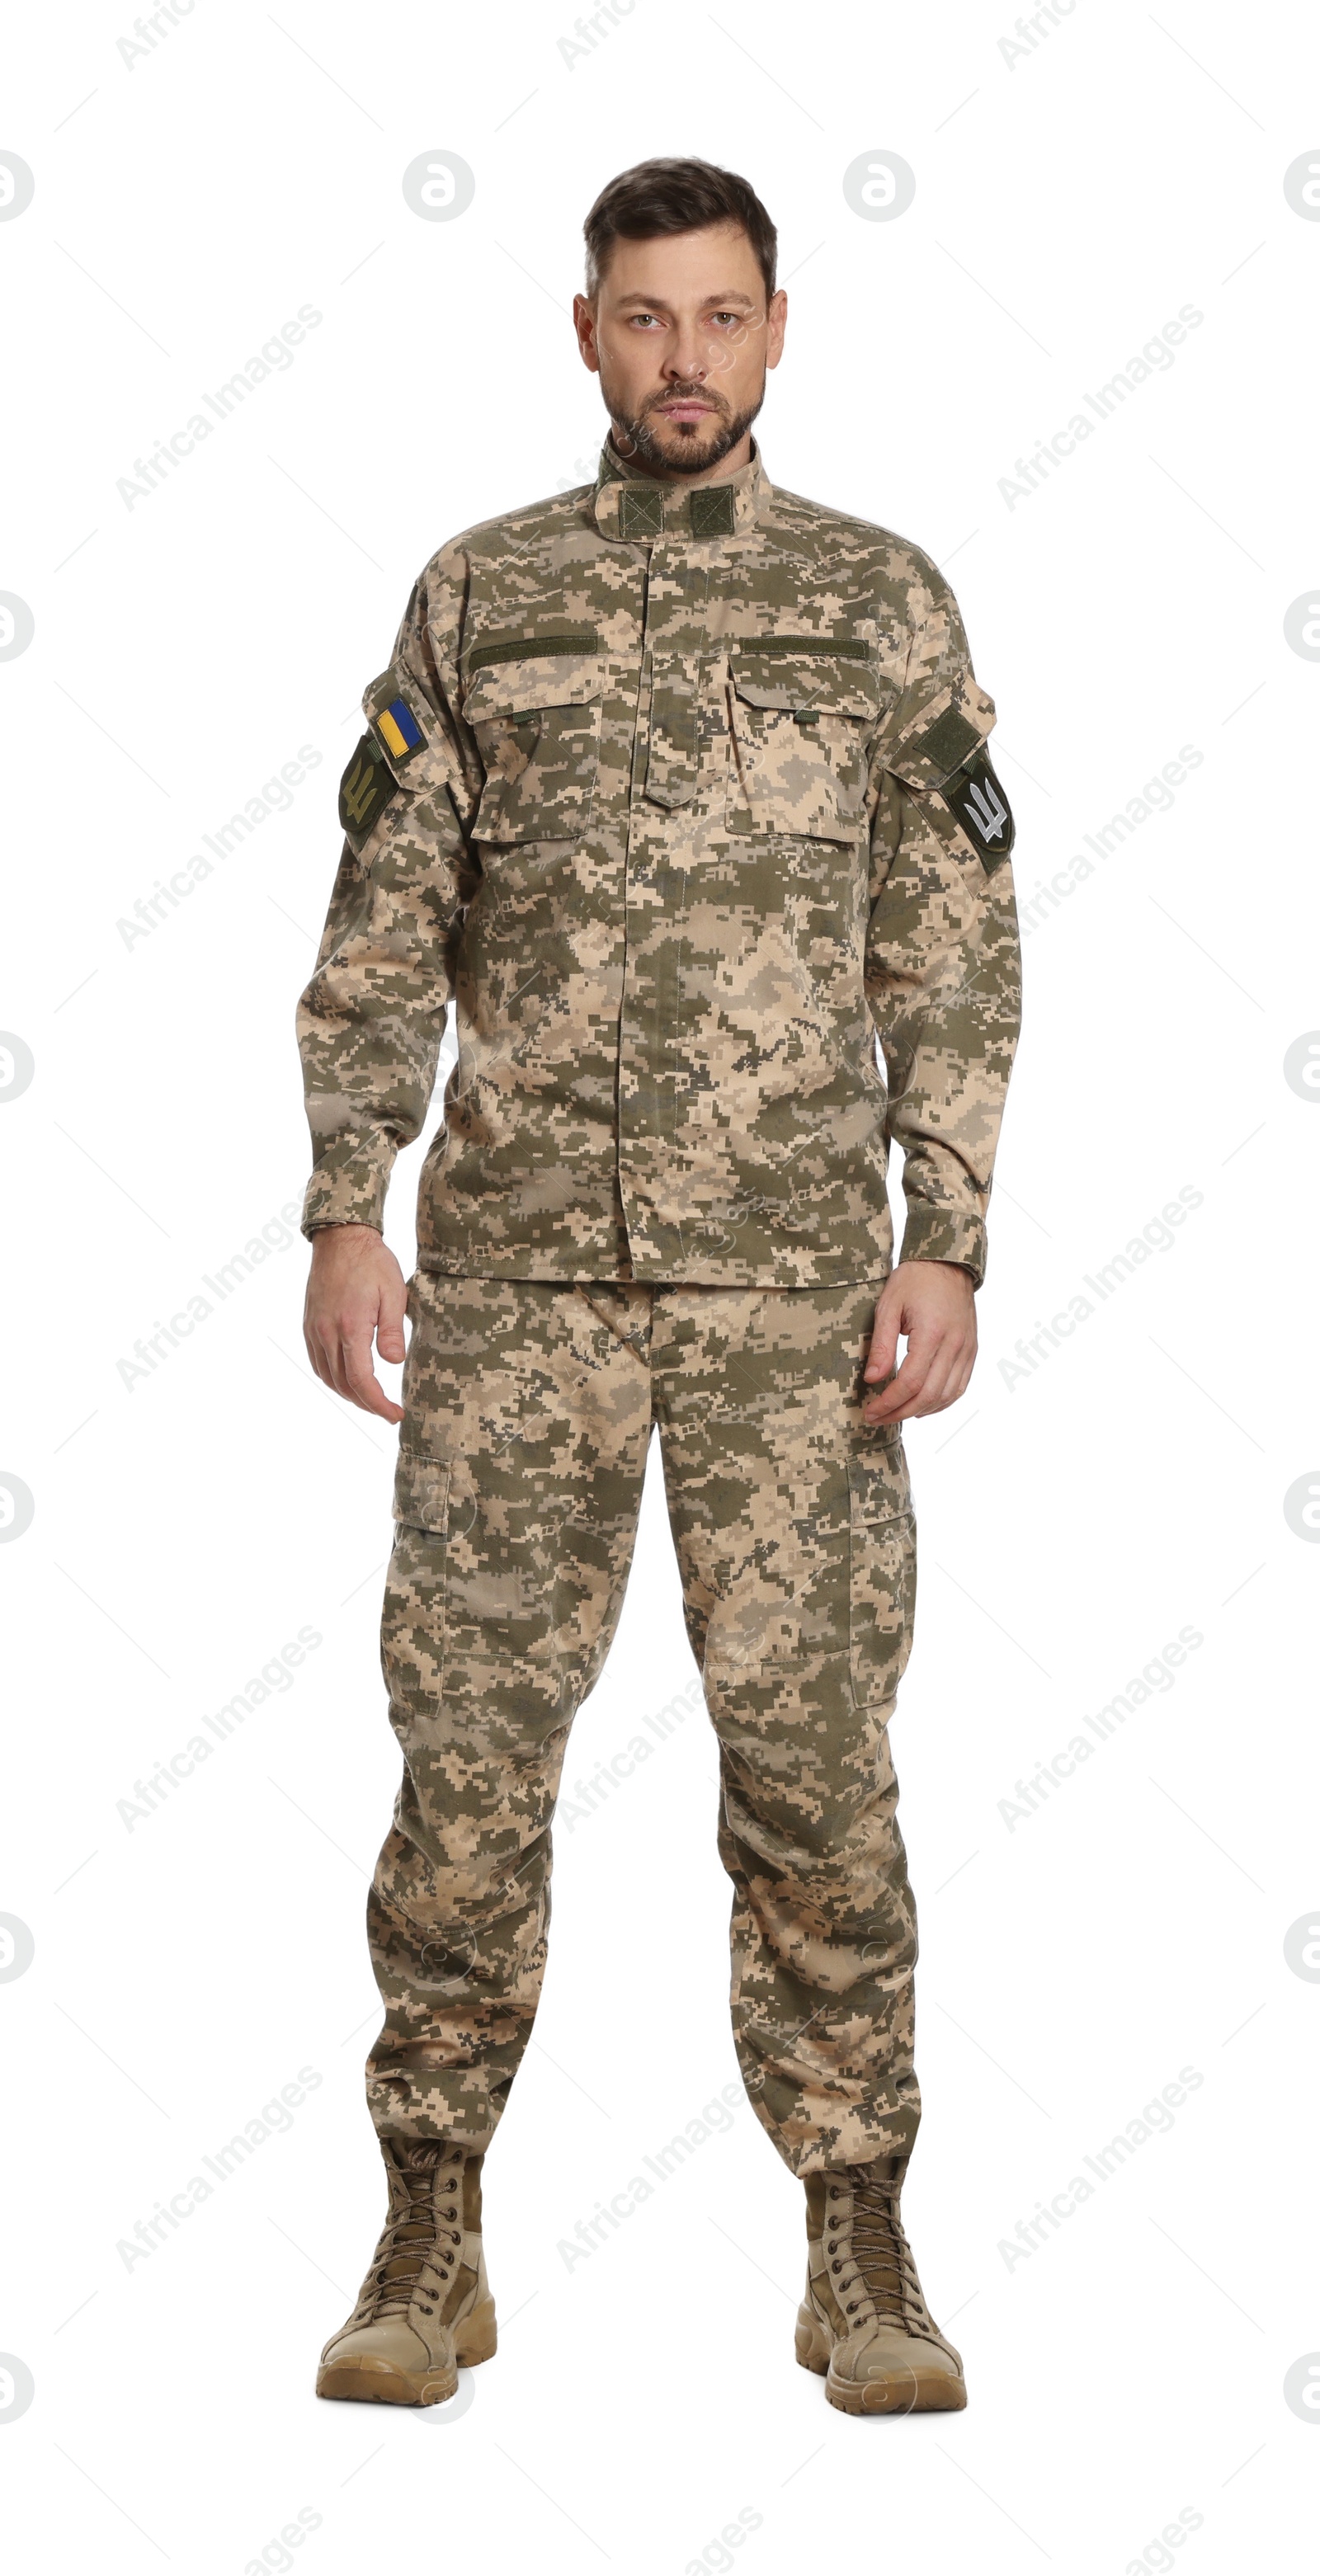 Photo of Ukrainian soldier in military uniform on white background